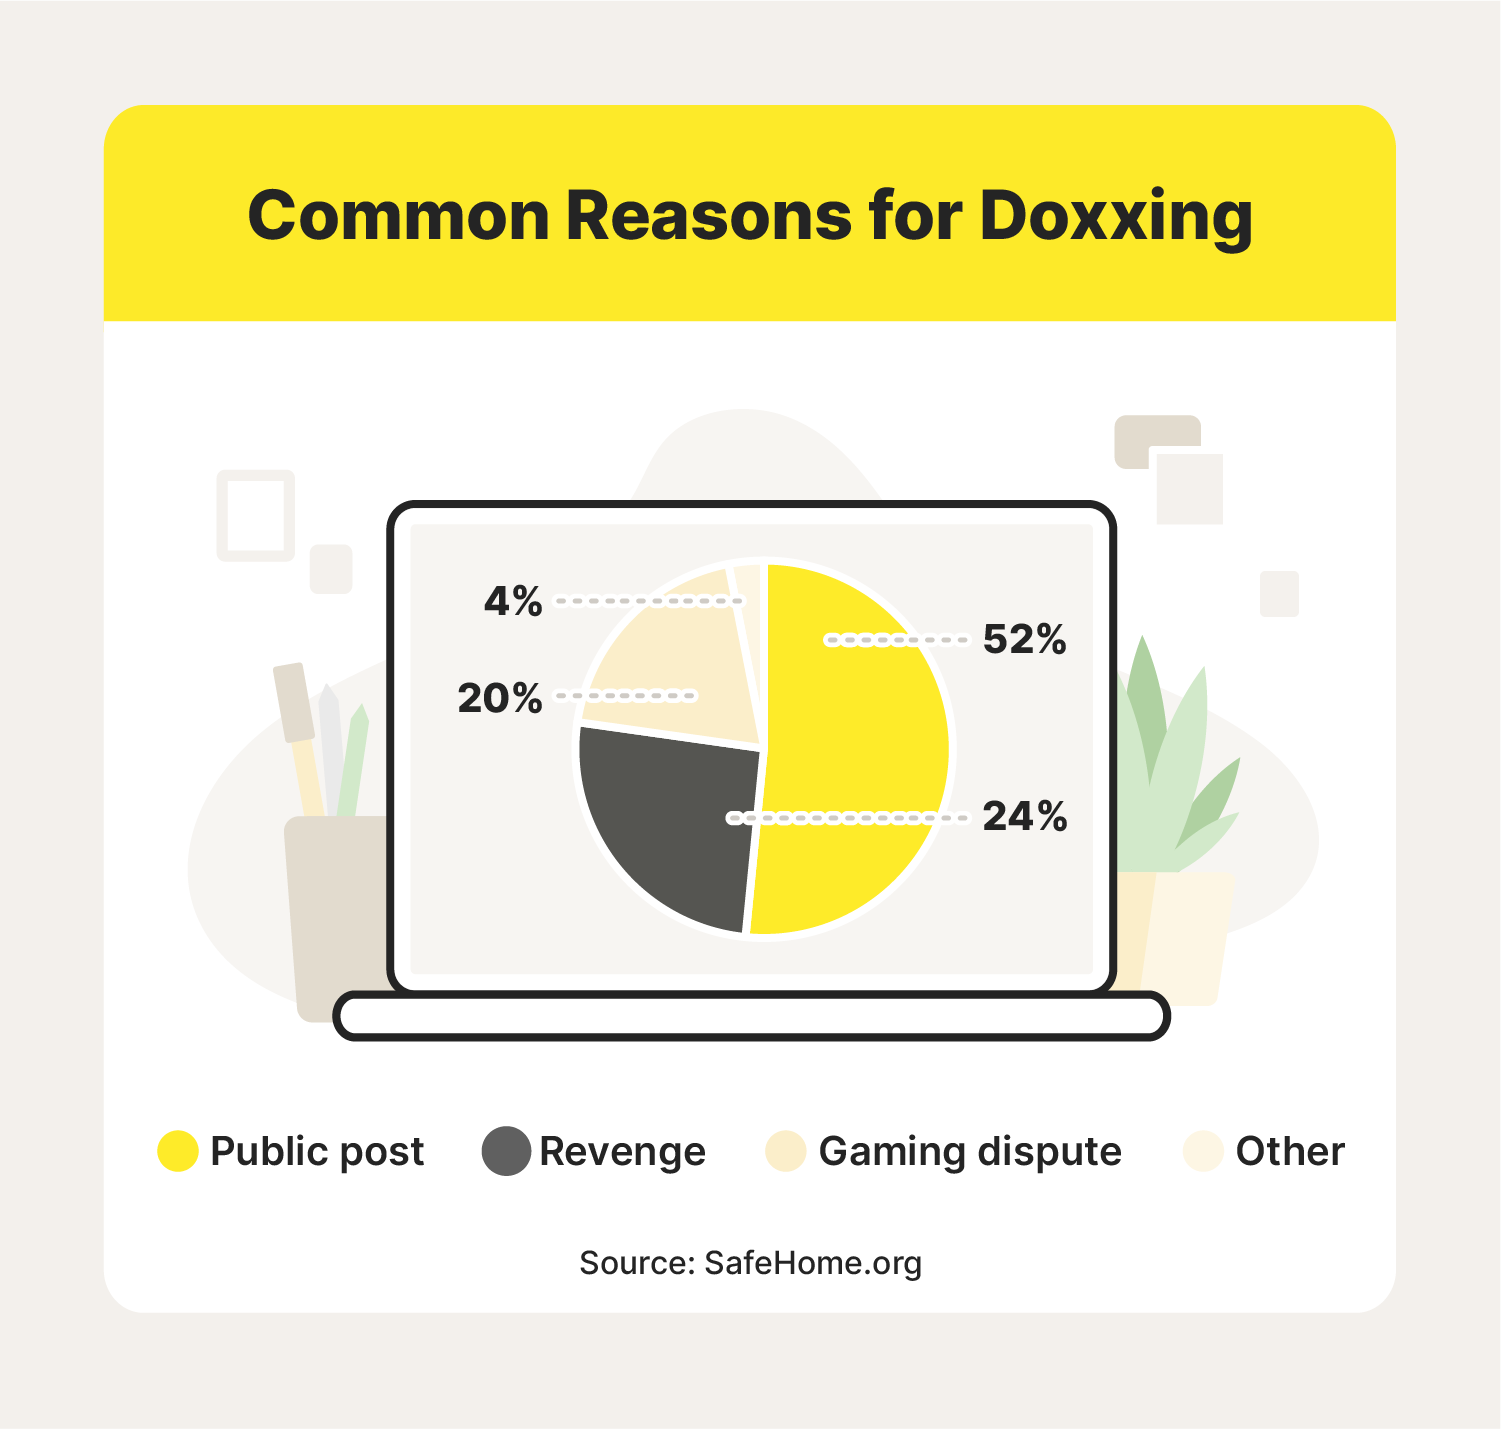 A visualization of the most common reasons people choose to dox others.